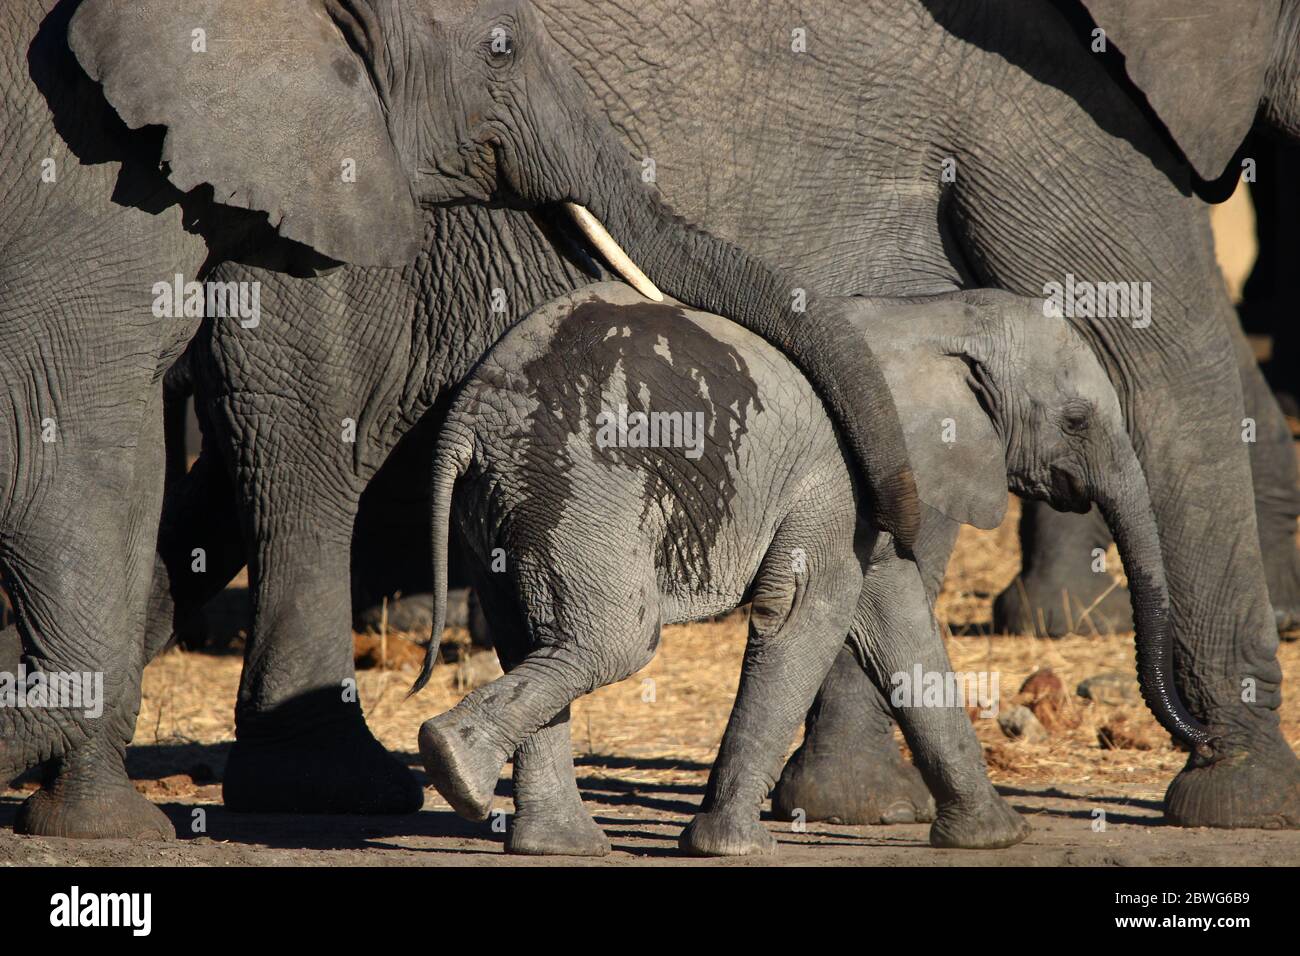 A young South African elephant walks alongside adults in a very safe atmosphere. His mother's trunk rests gently on him. Stock Photo